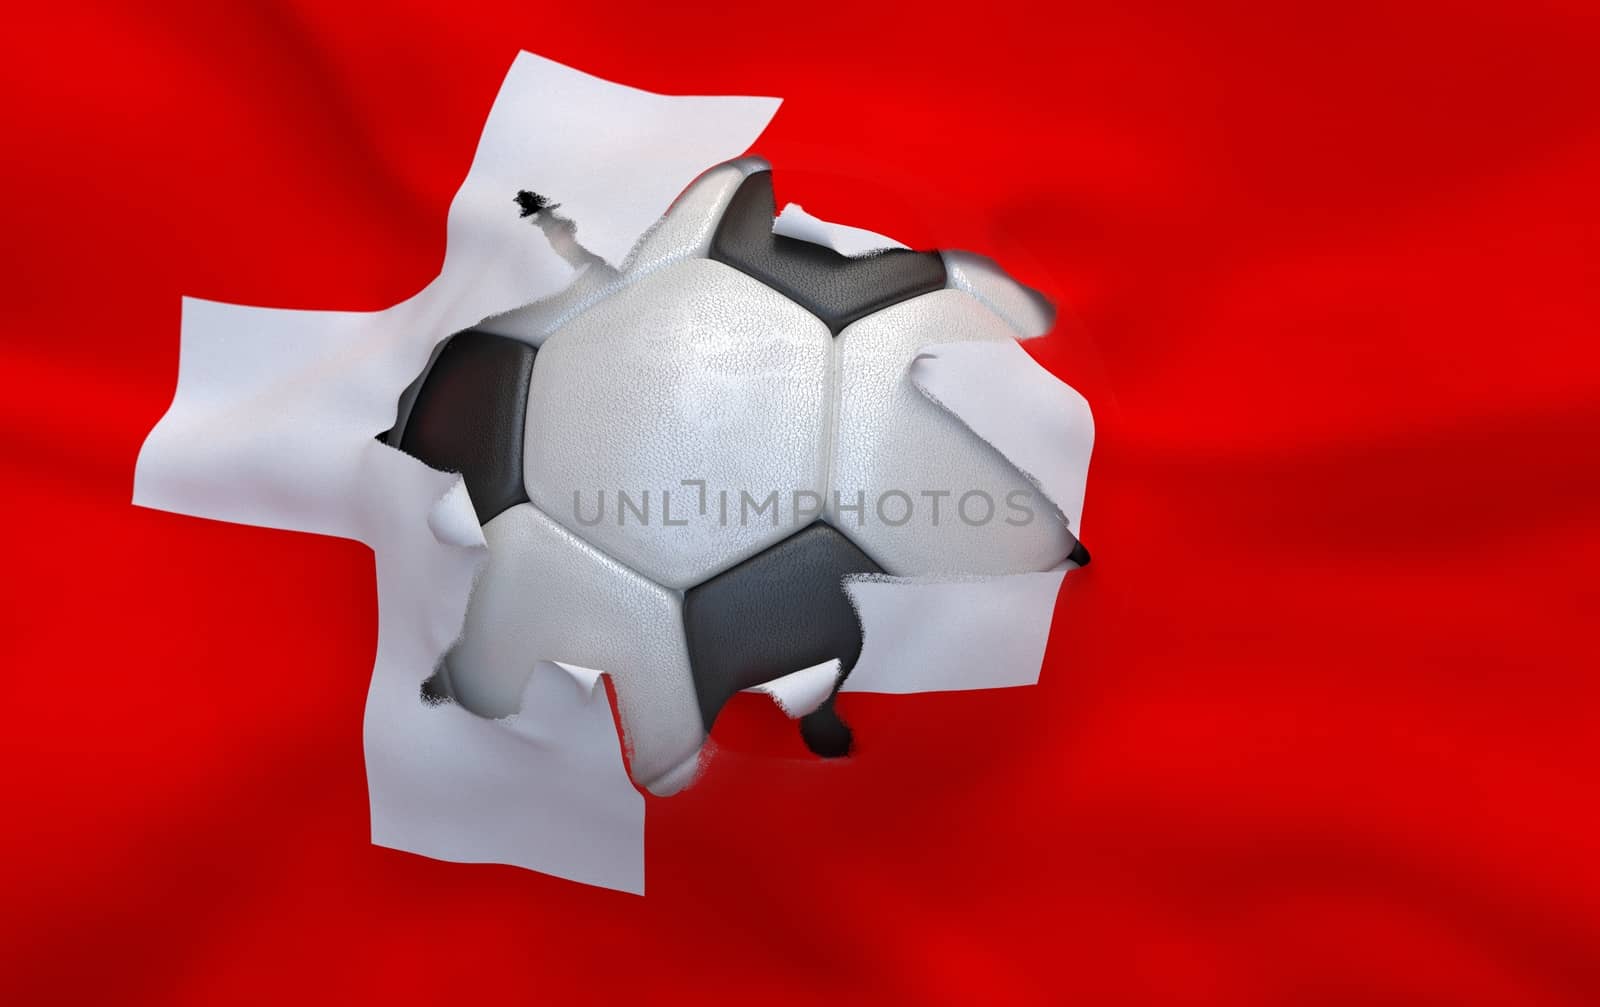 The hole in the flag of Switzerland and soccer ball by Barbraford